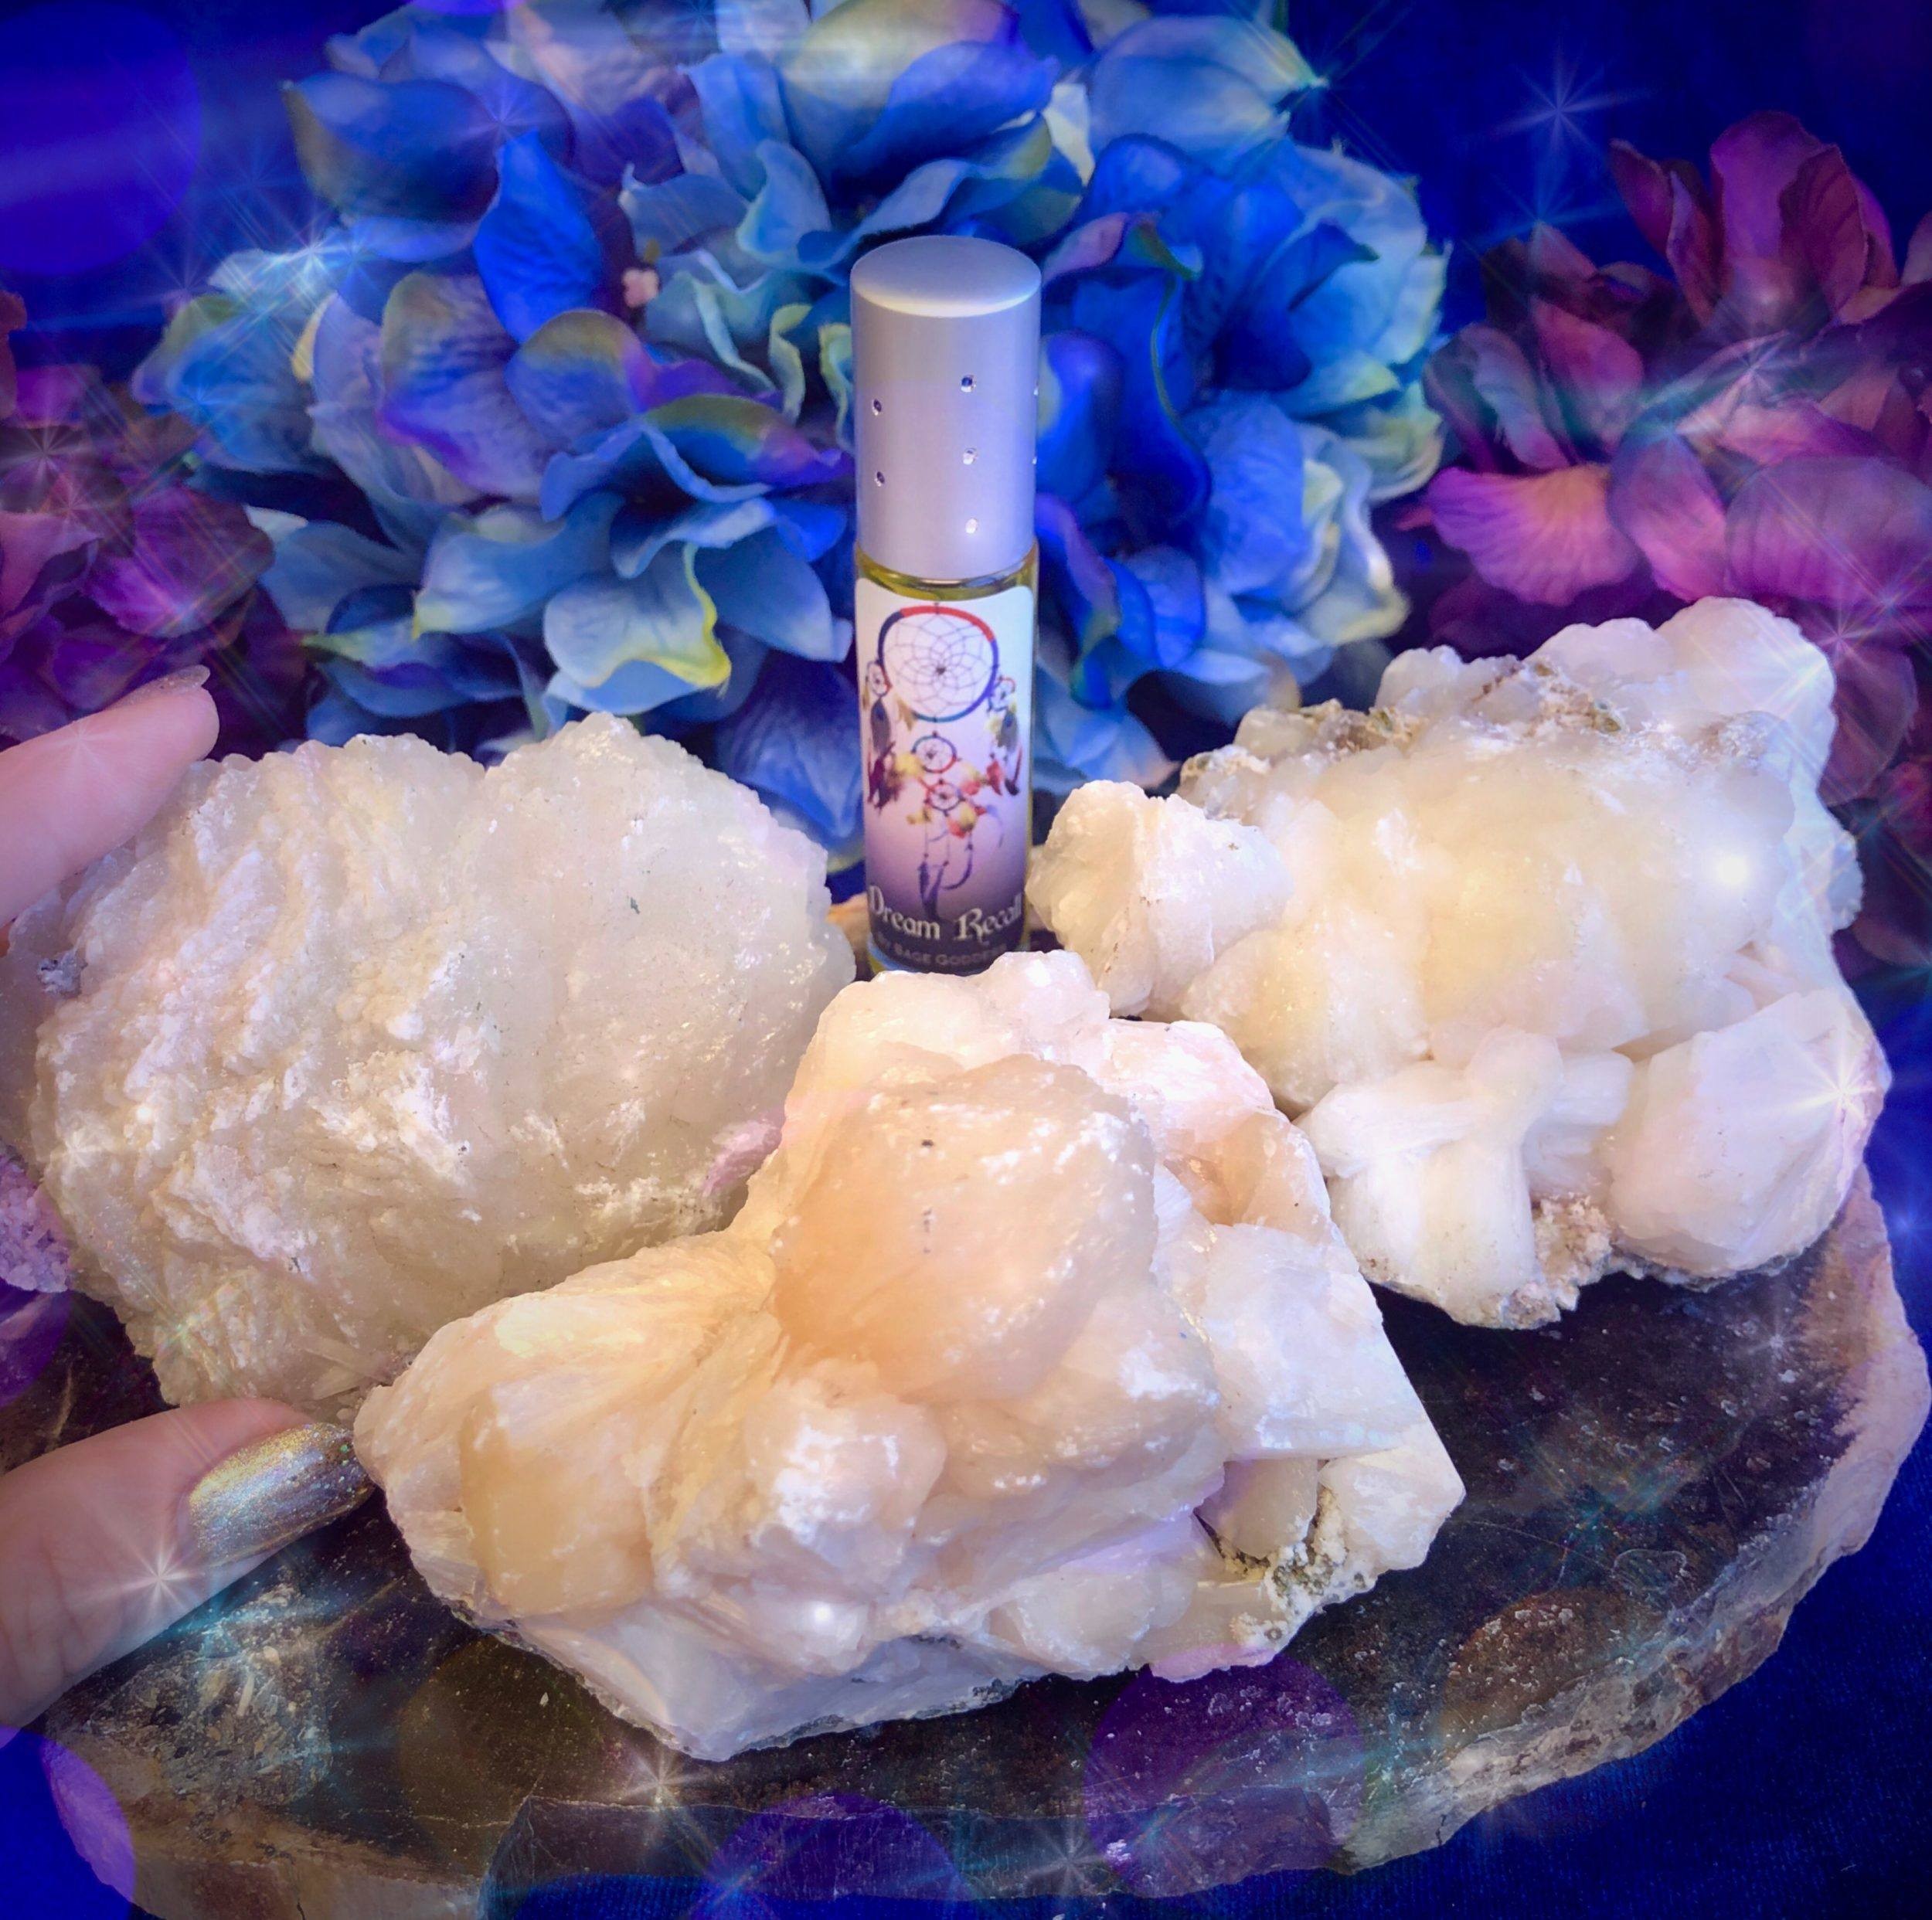 Natural_Stilbite_Clusters_with_Dream_Recall_Perfume_DD_4of5_8_12